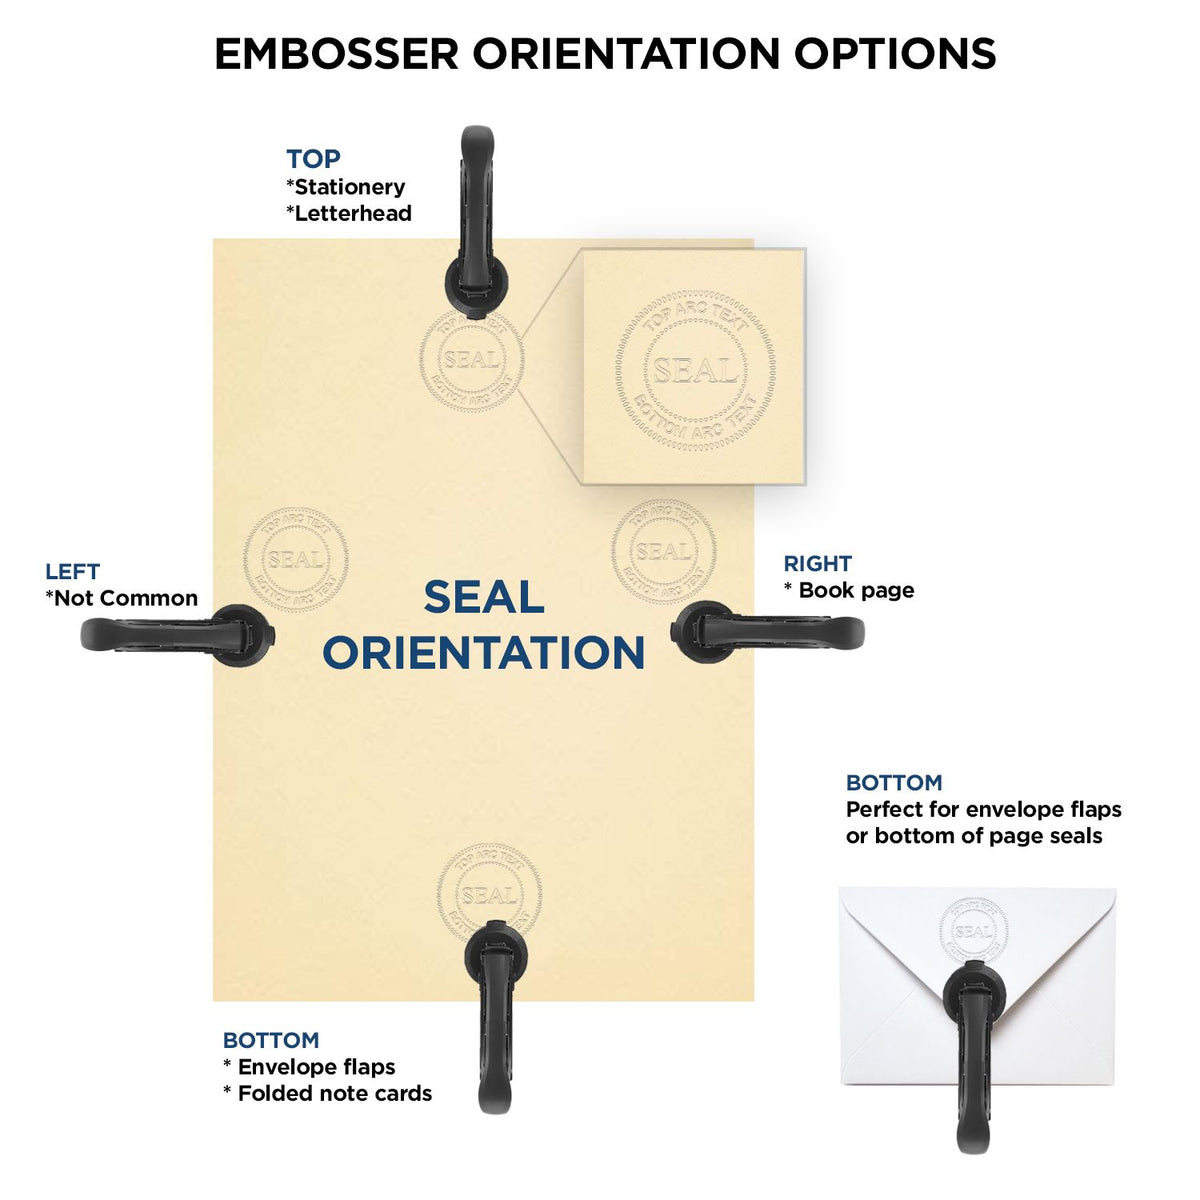 An infographic for the Handheld Virginia Professional Engineer Embosser showing embosser orientation, this is showing examples of a top, bottom, right and left insert.